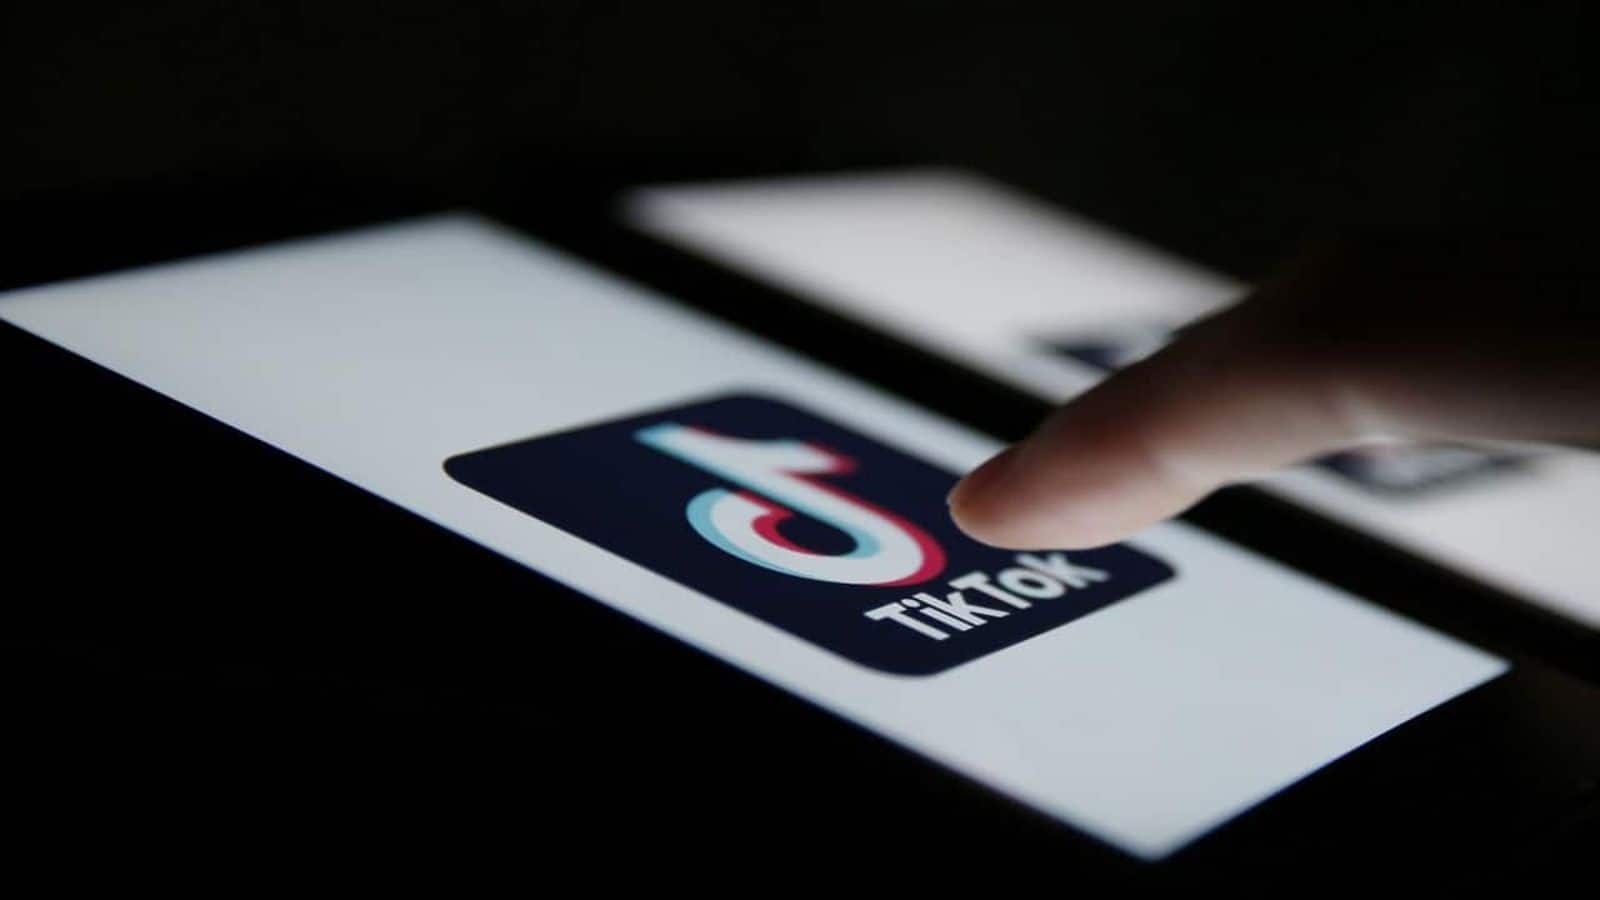 TikTok sues US government over law mandating sale or ban